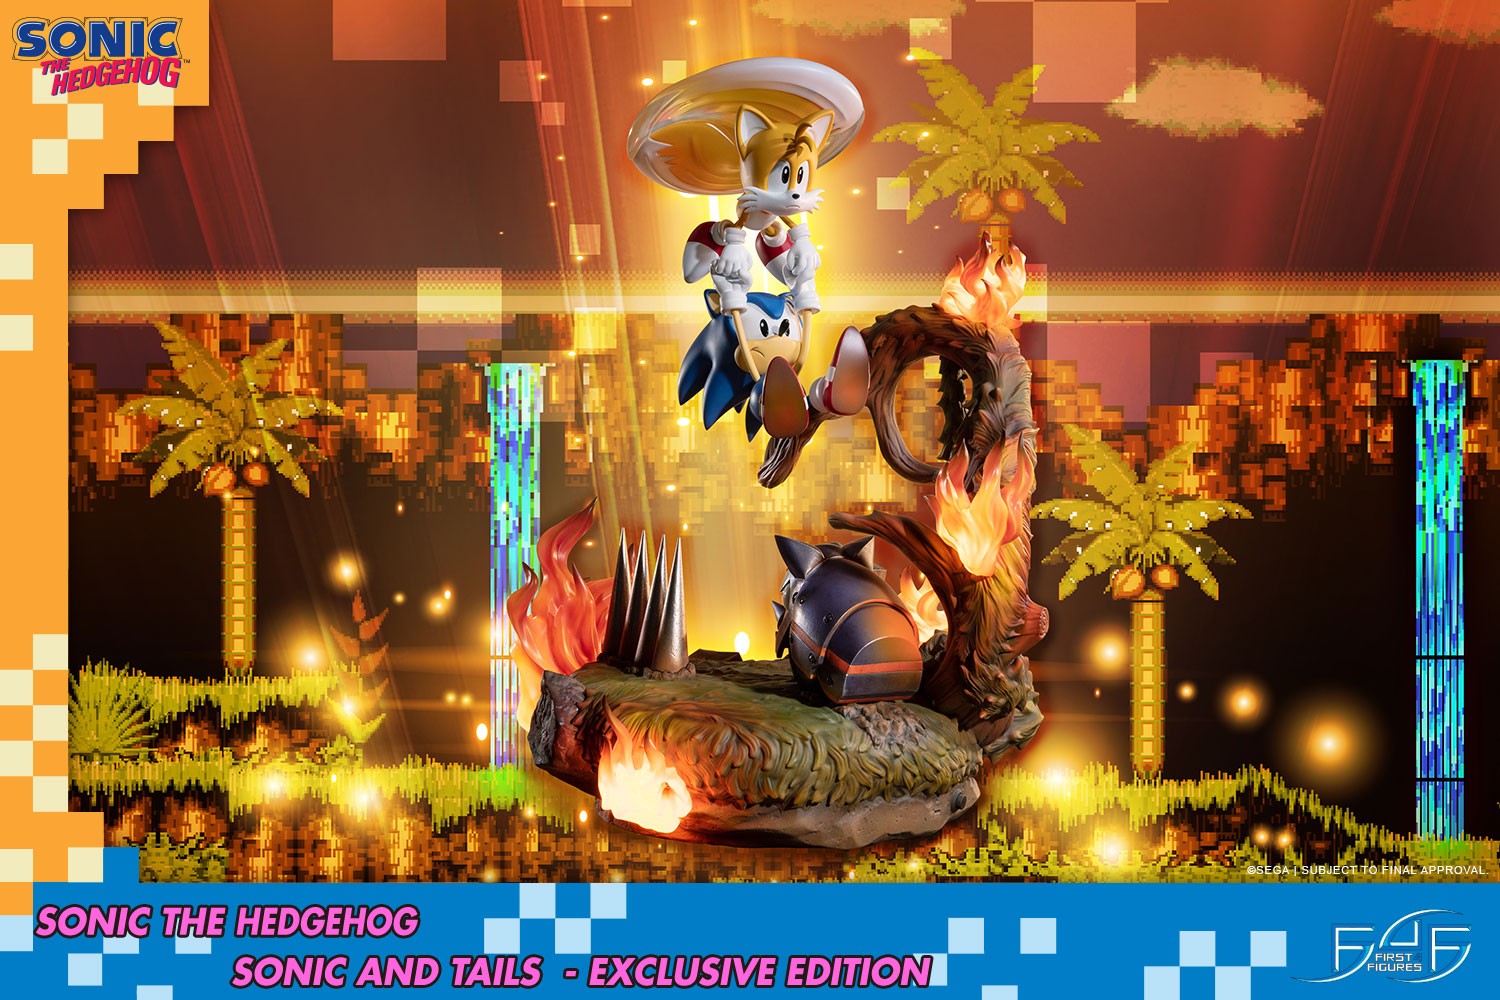 Sonic the Hedgehog – Sonic and Tails Exclusive Edition